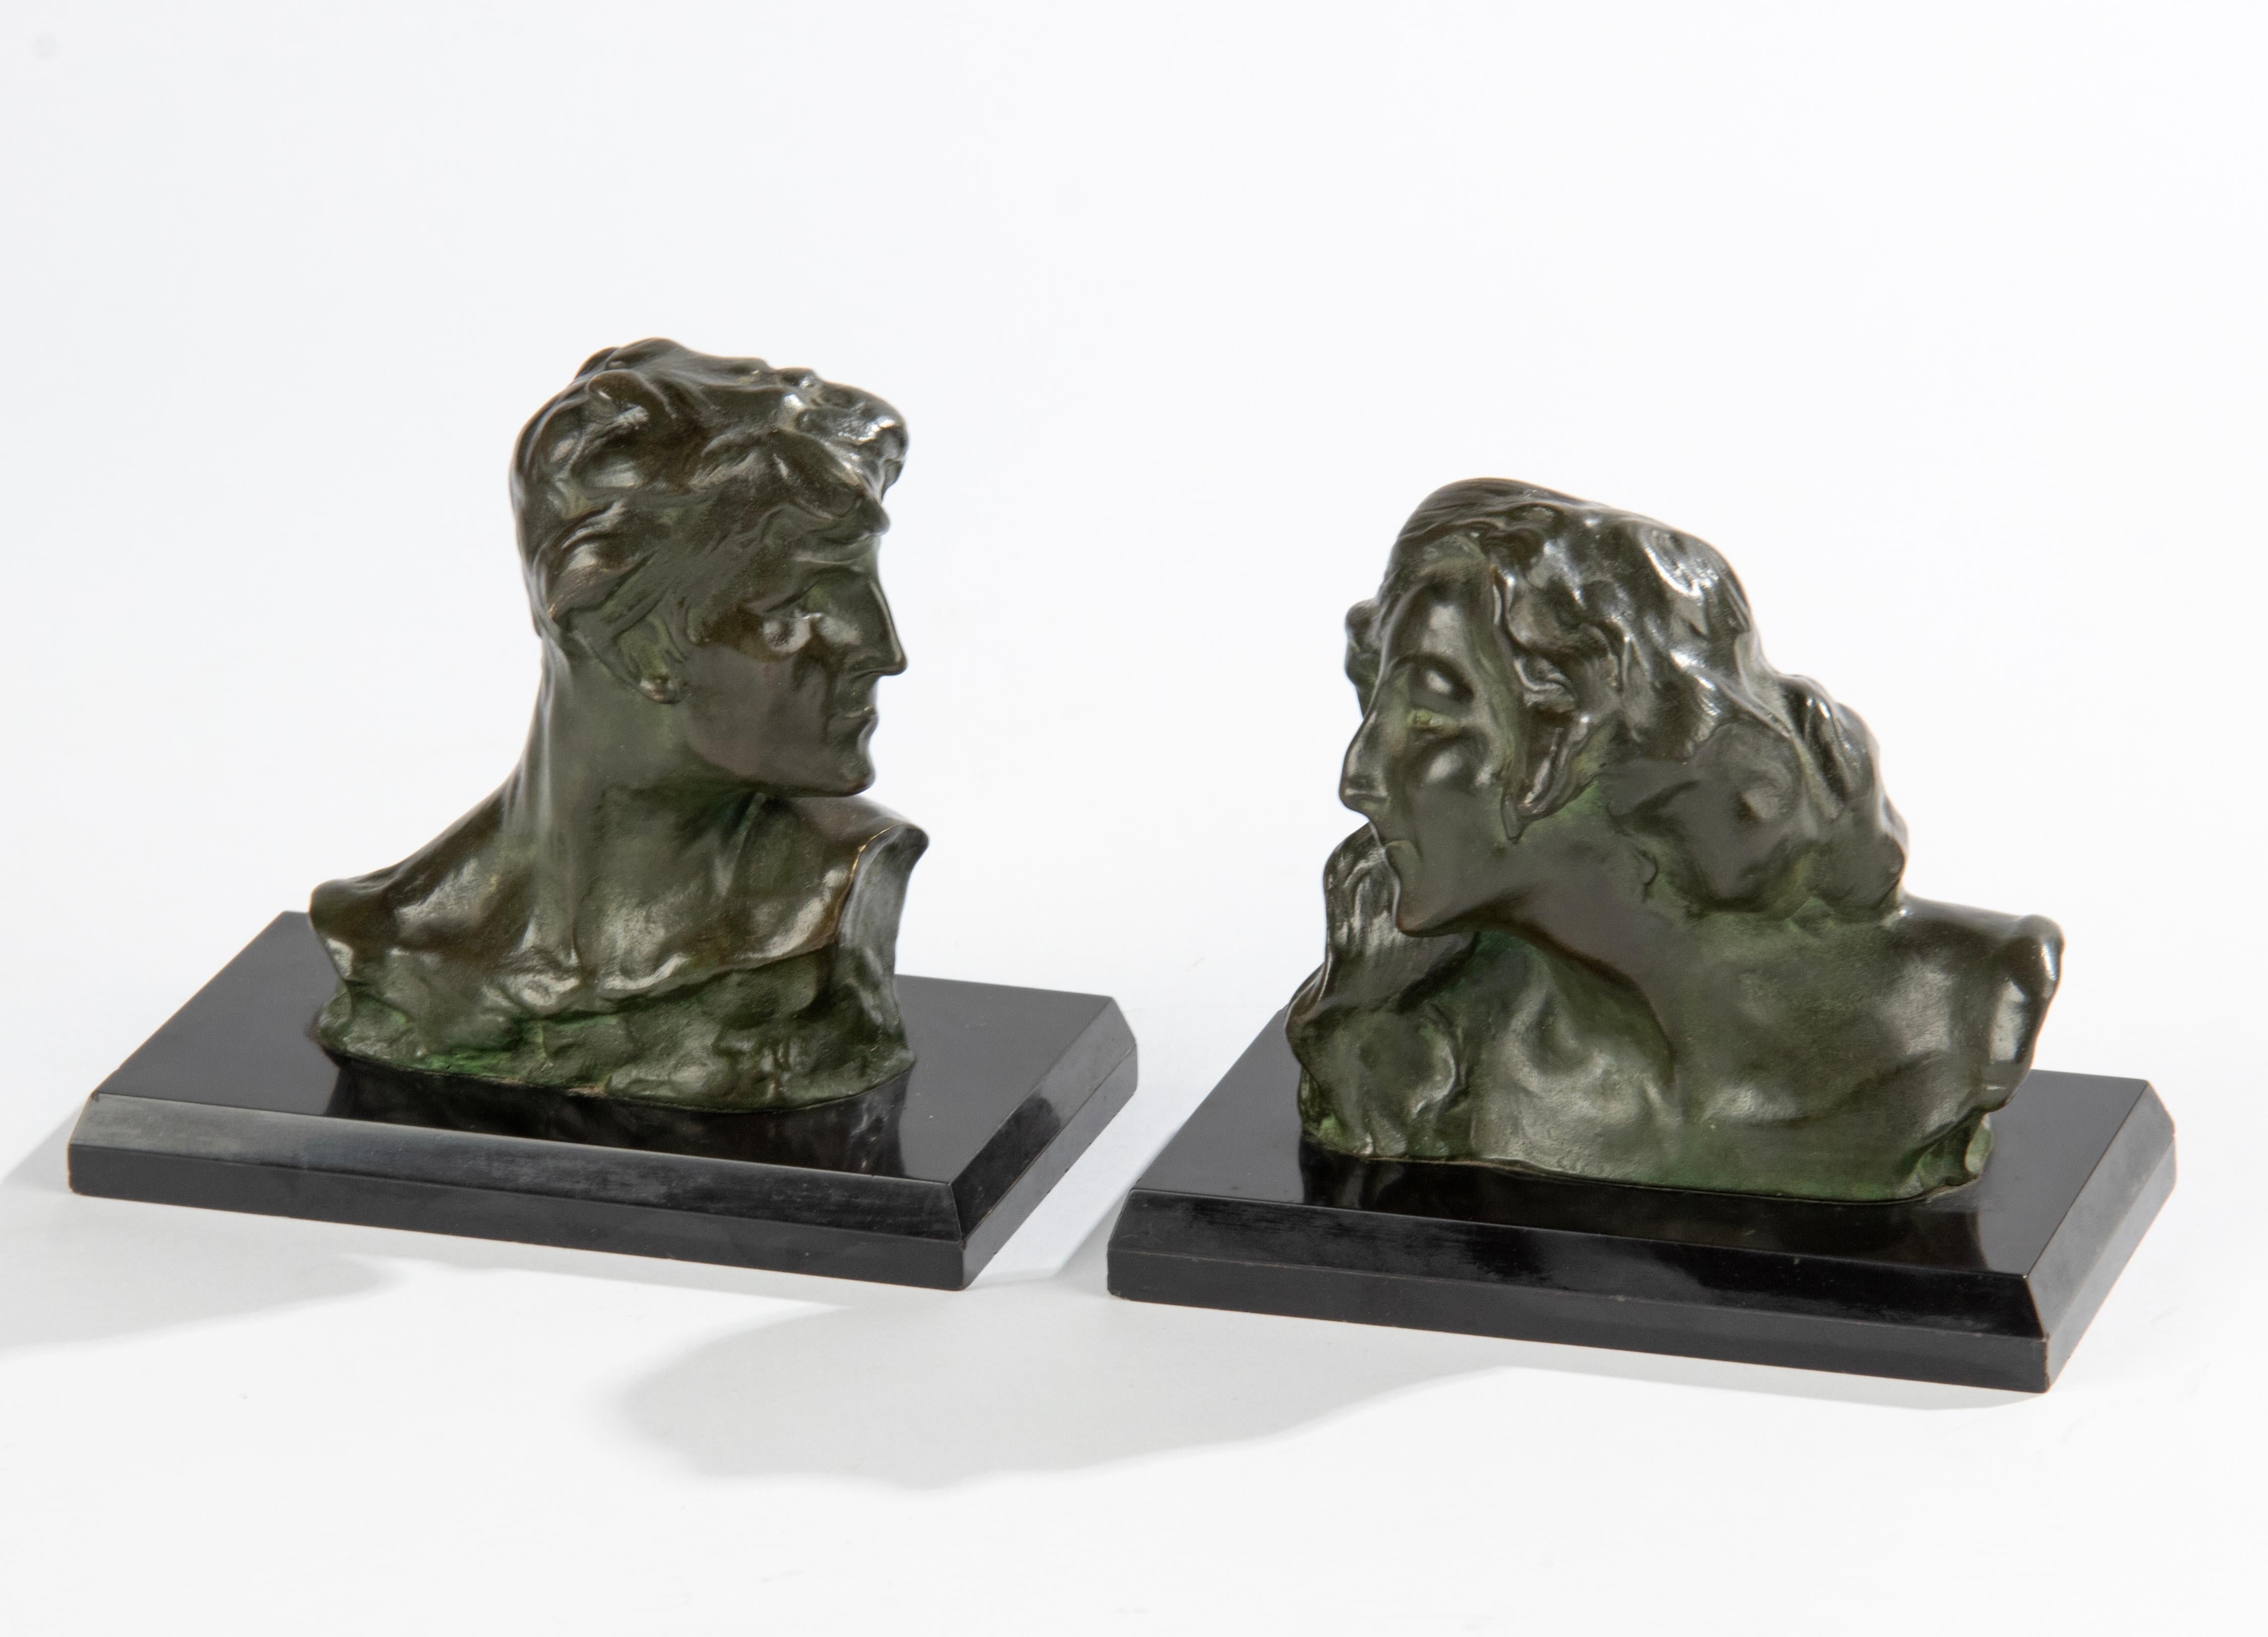 Matching pair of Art Nouveau period bookends or busts. The figurines are made of green patinated bronze, on a Belgian black marble base. The patina on the bronze is in good condition, marble in good condition as well, some tiny chips on the edge,